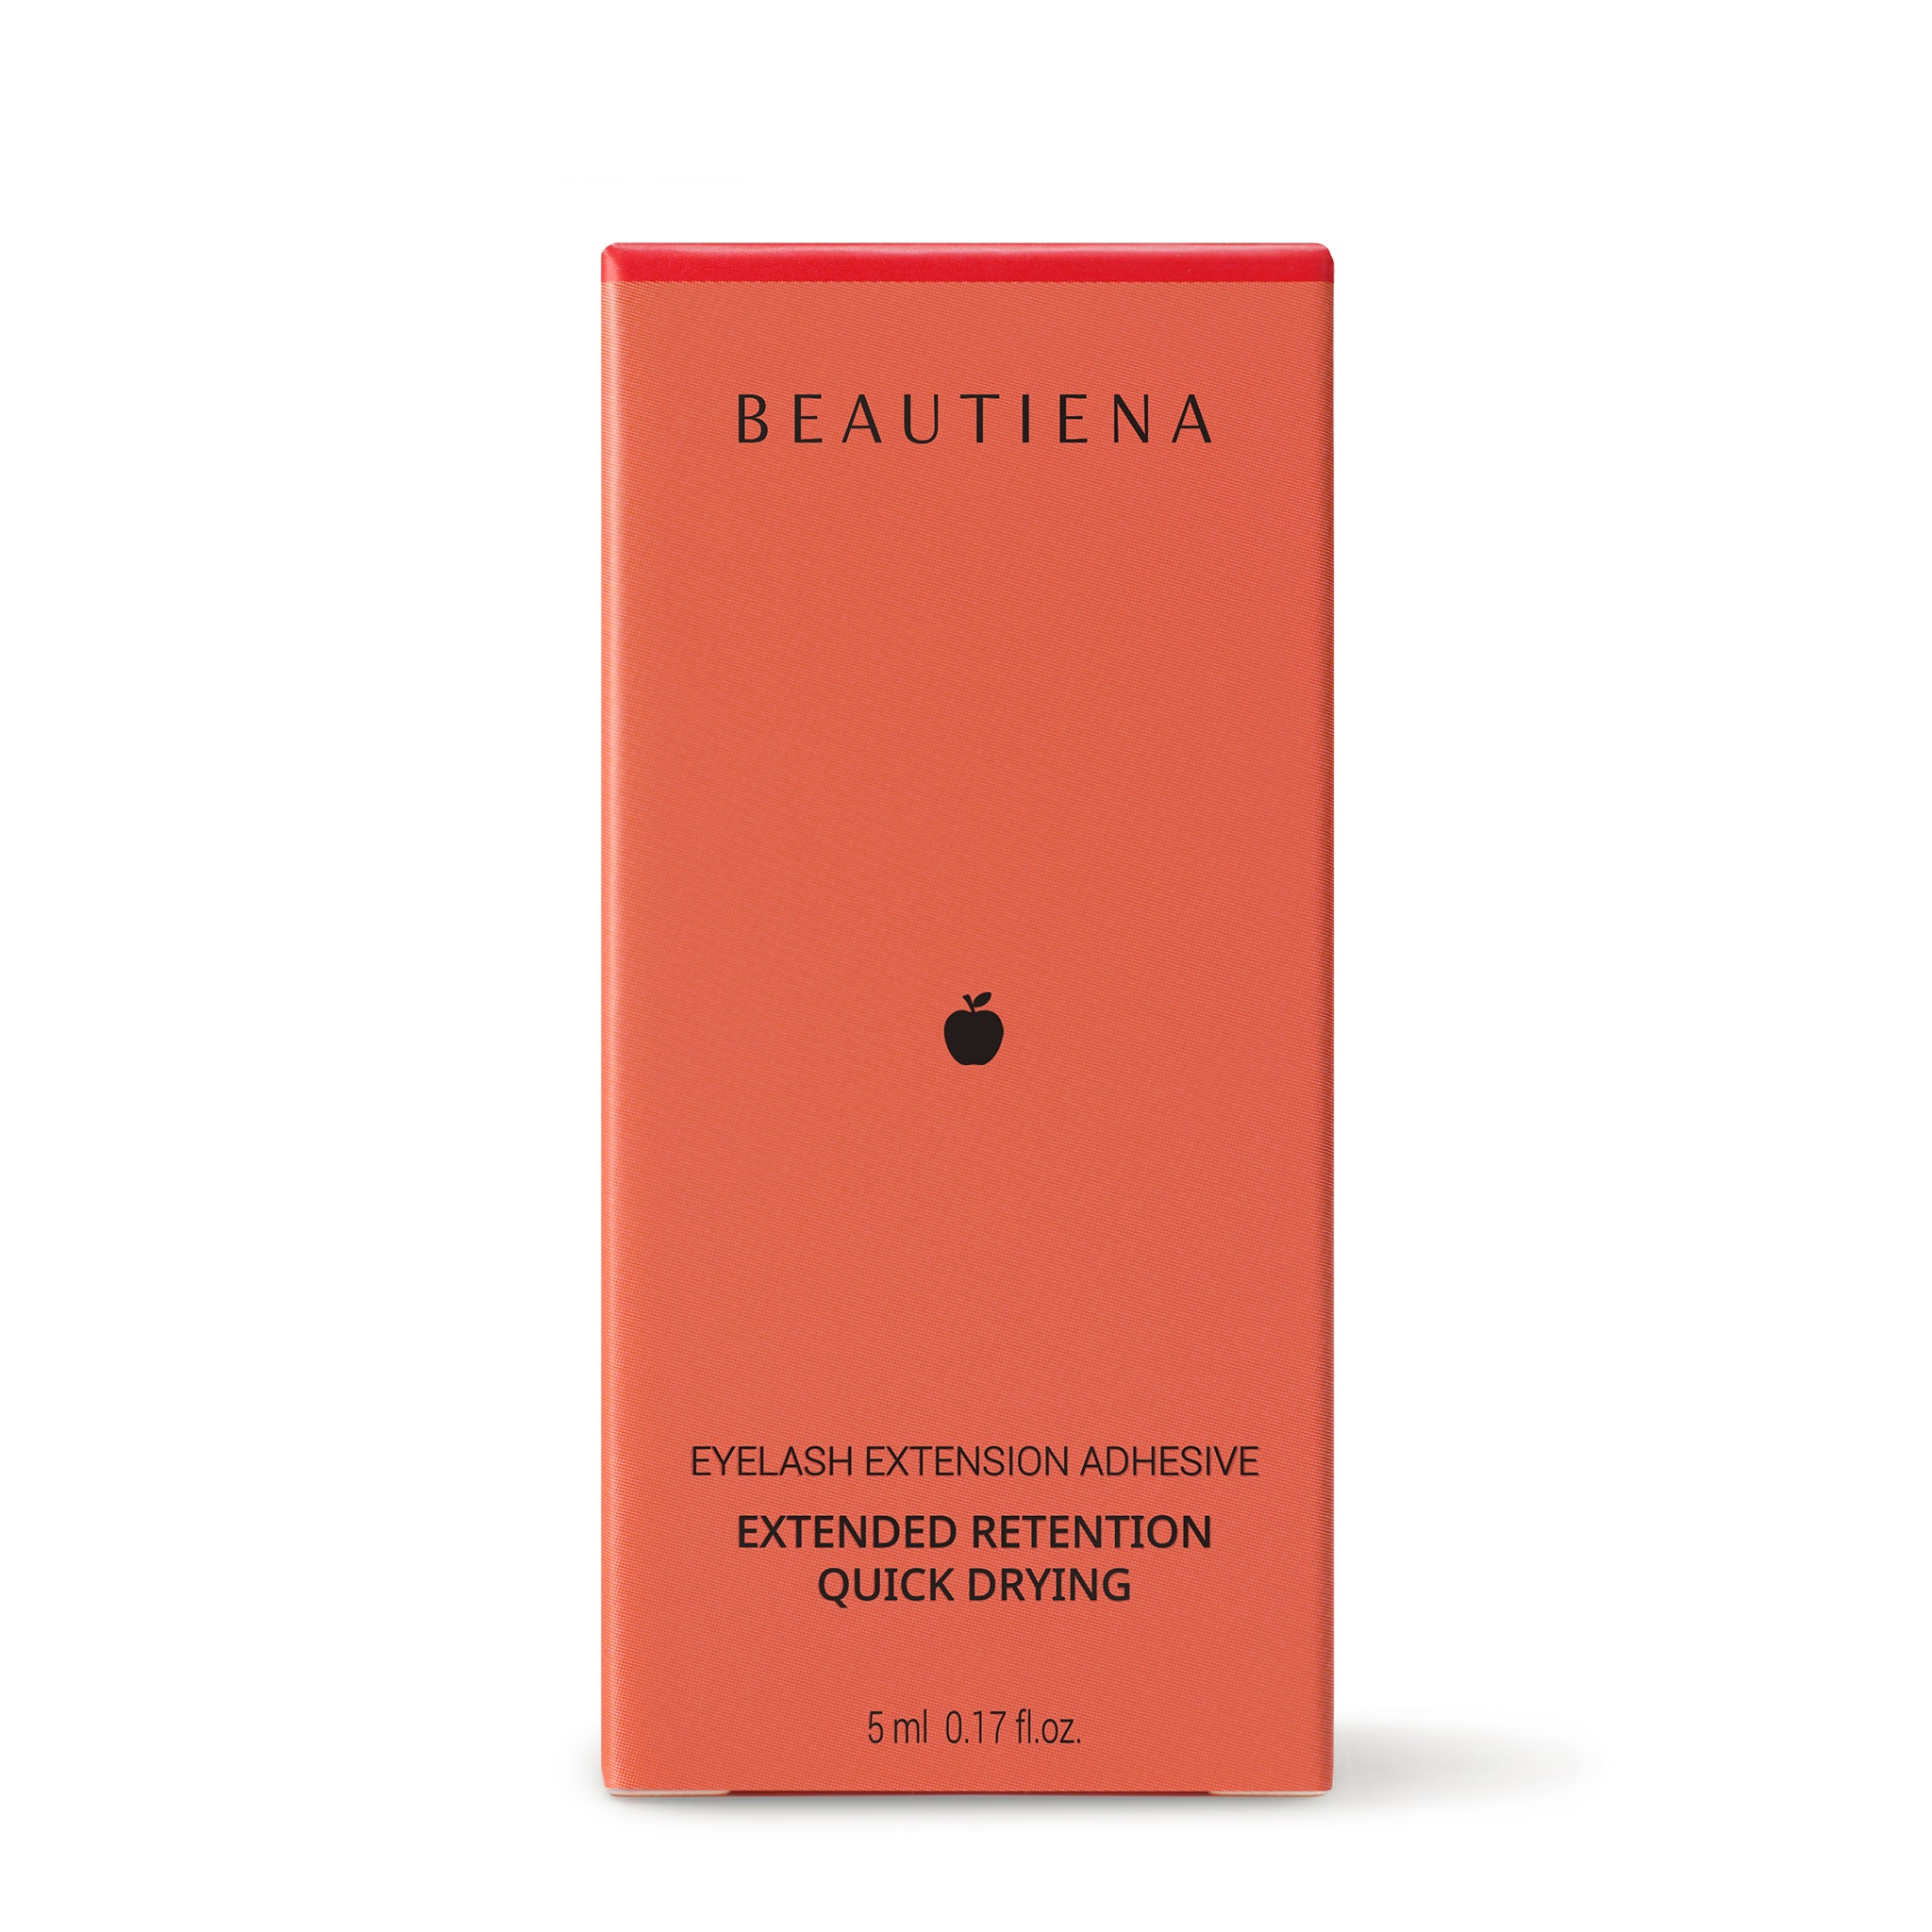 BEAUTÉ Essential Glue (Apple) offers remarkable retention up to 7 weeks and a quick drying time of 1.0 - 2.0 seconds. Not only harmful materials such as latex and formaldehyde are used but no animal test is done as well. The glue provides lower fume which helps customers a better experience.